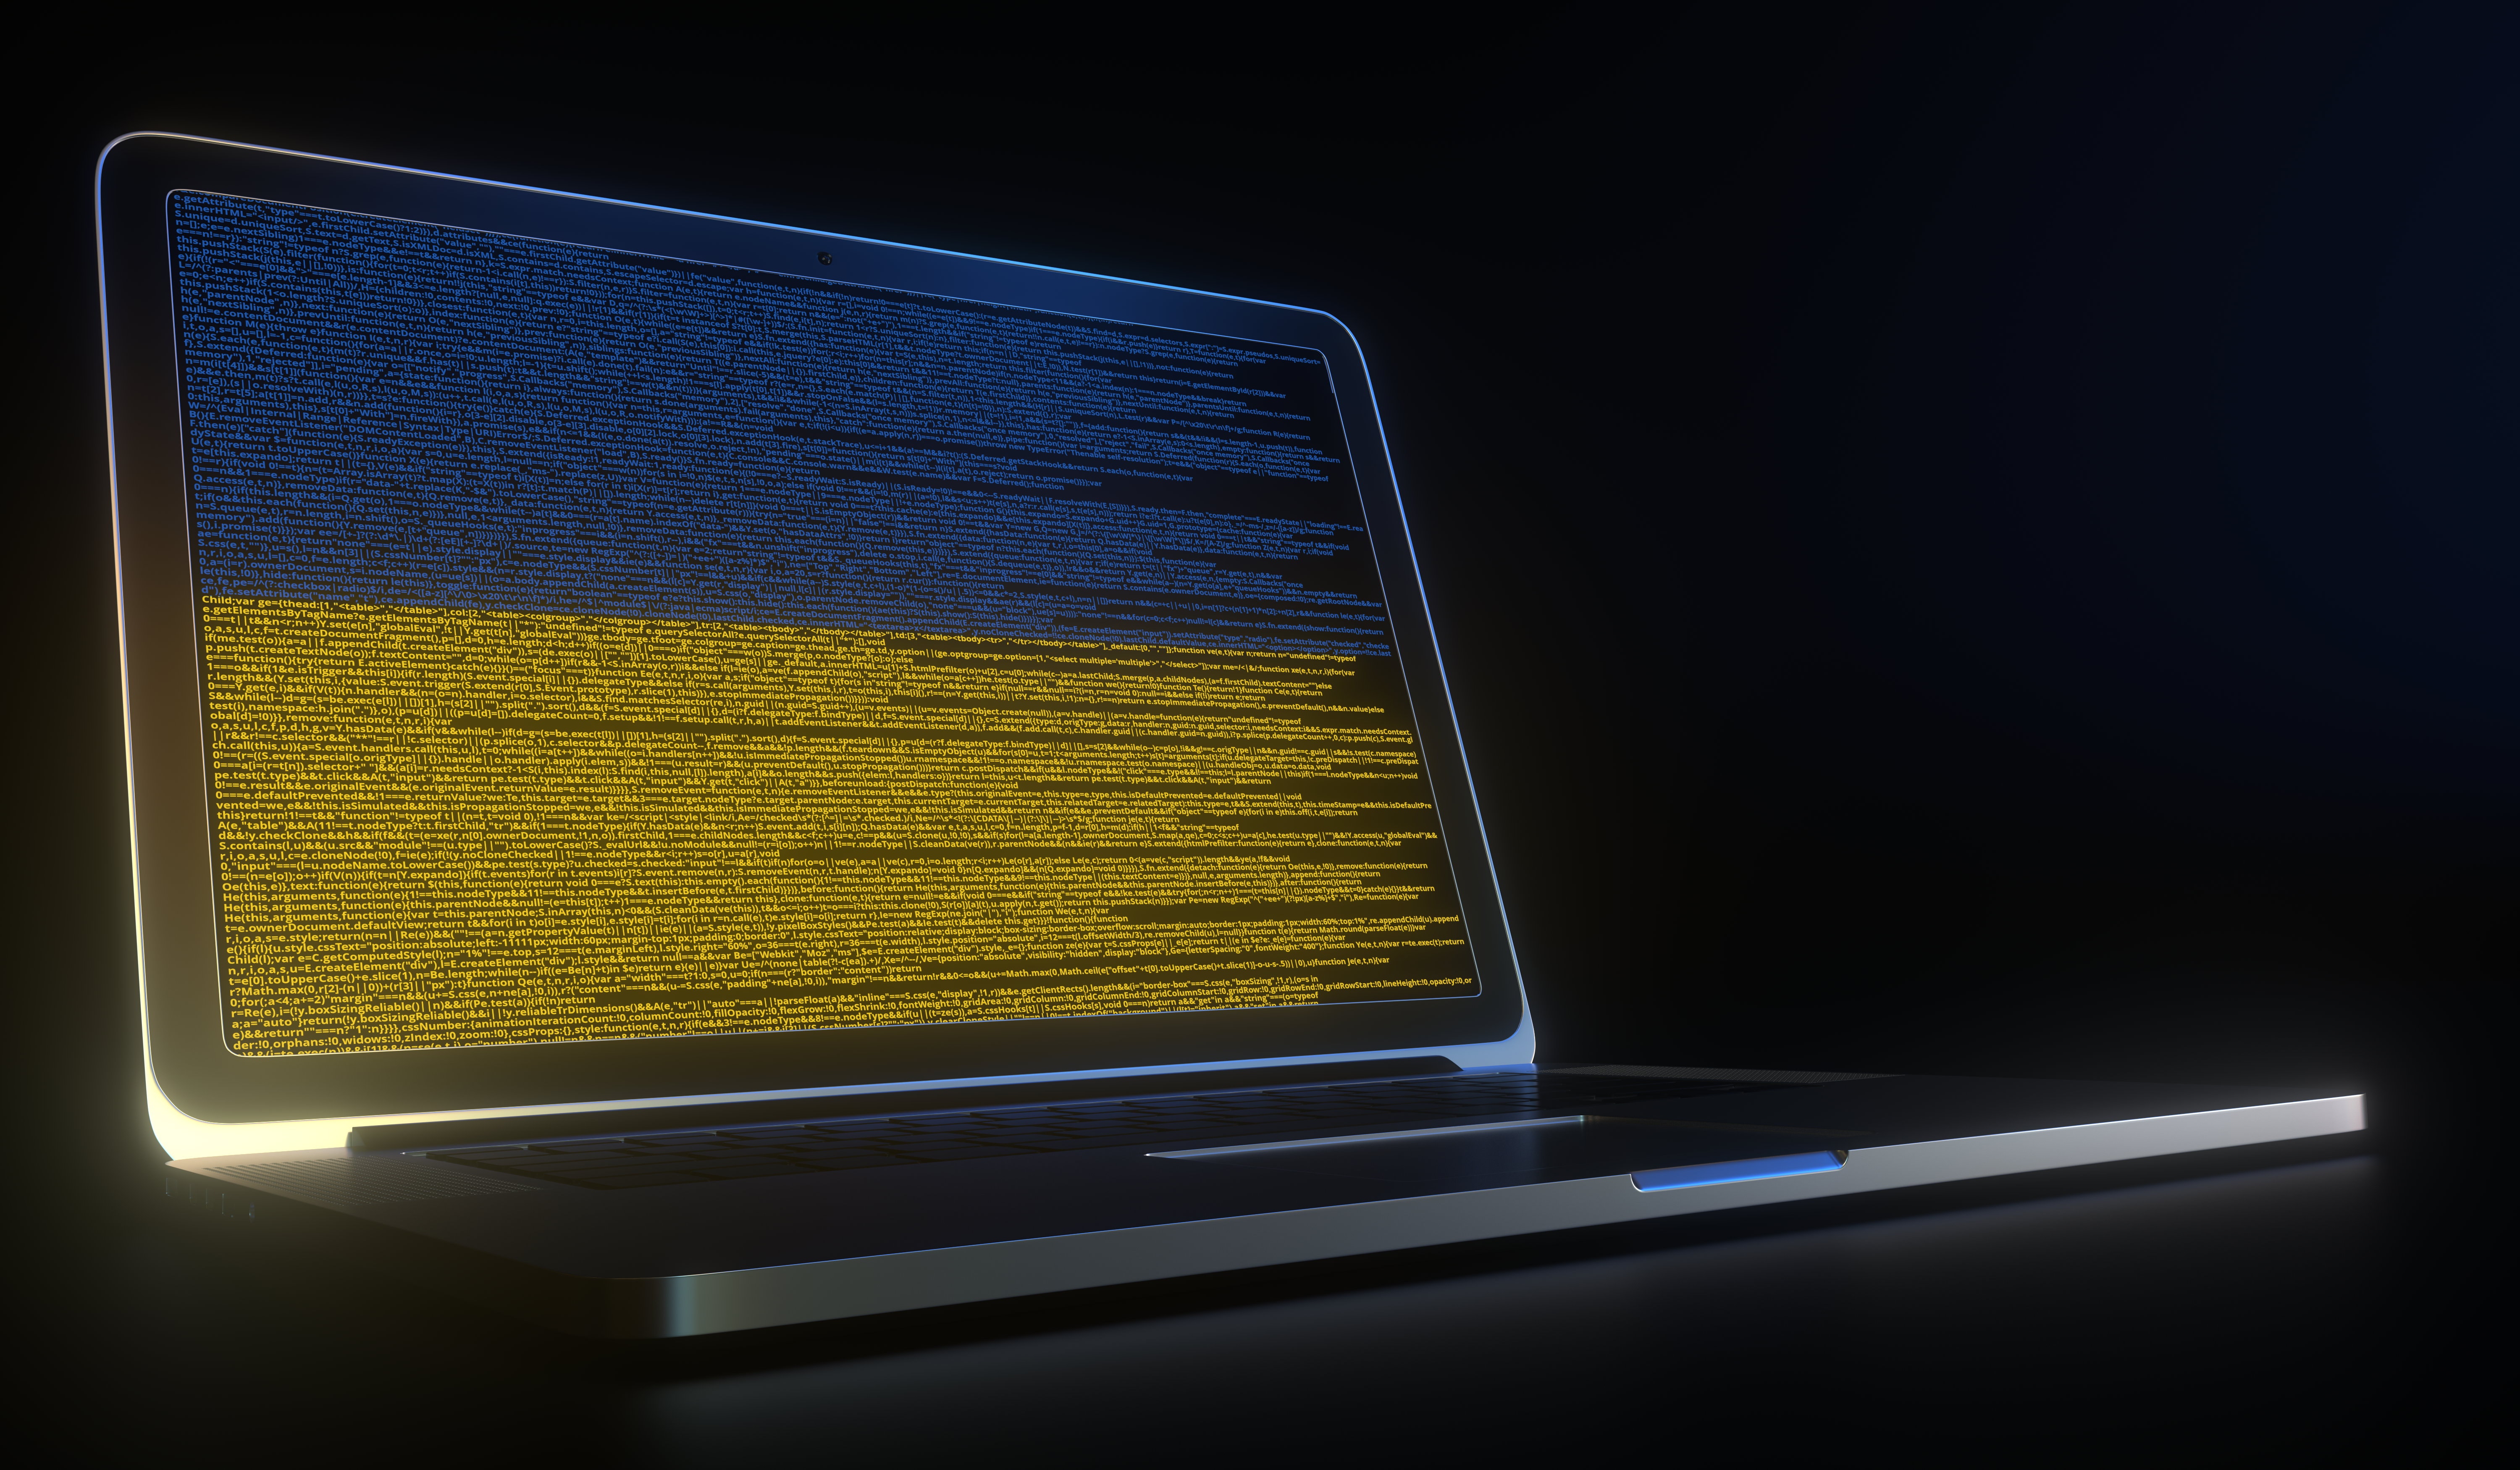 Russian Ministry Website Hacked With The Message 'Glory To Ukraine'